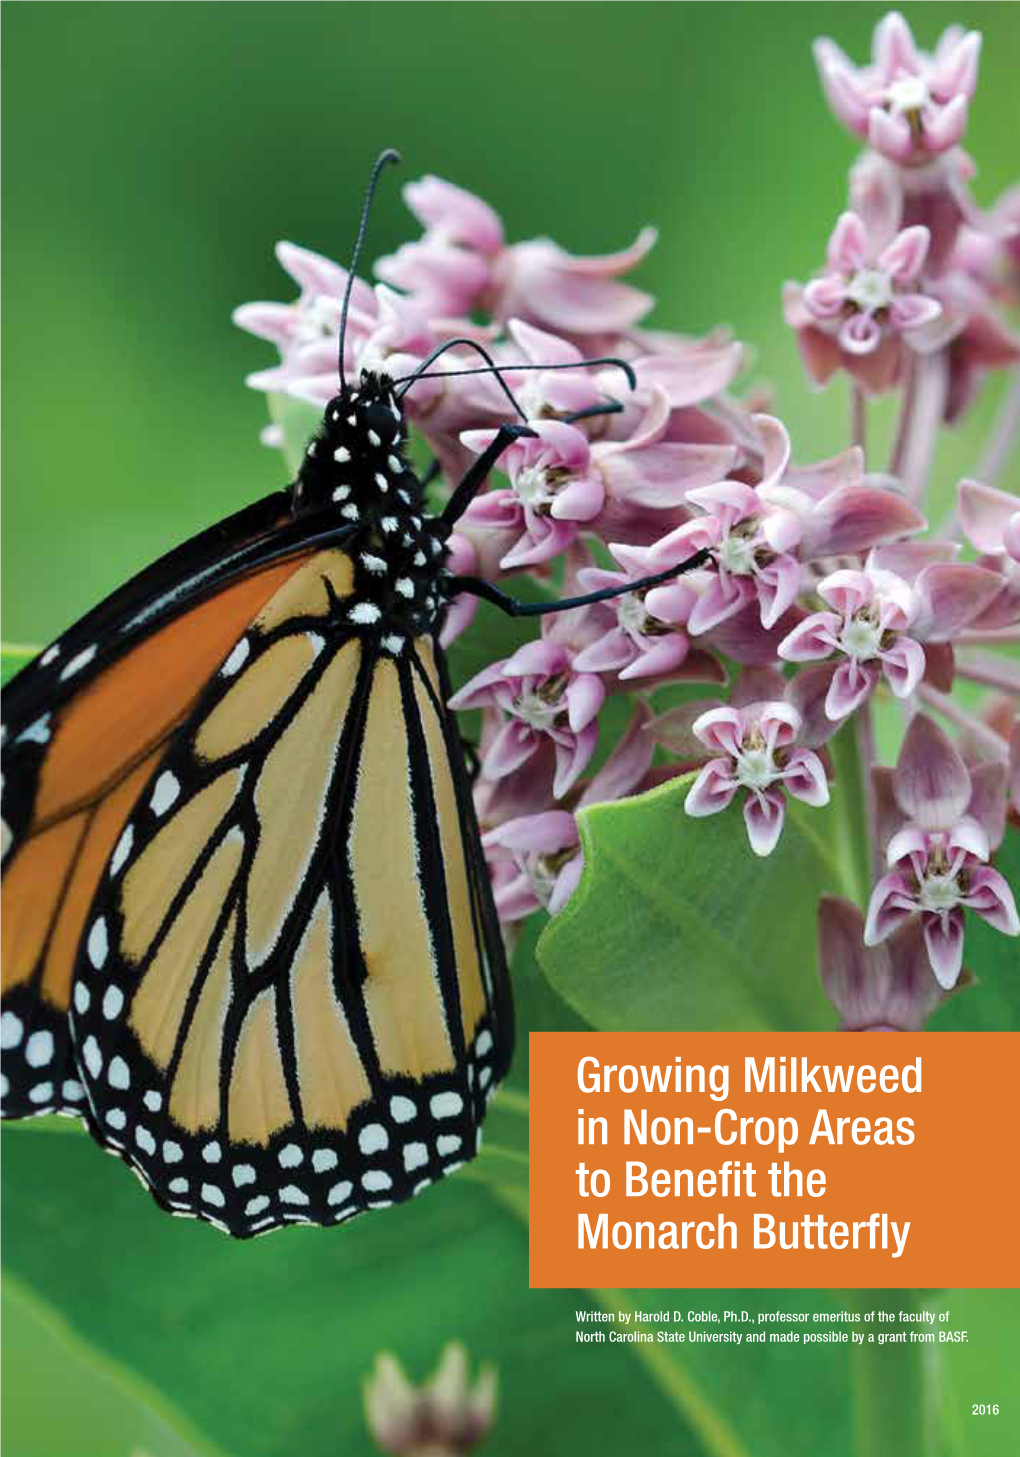 Growing Milkweed in Non-Crop Areas to Benefit the Monarch Butterfly